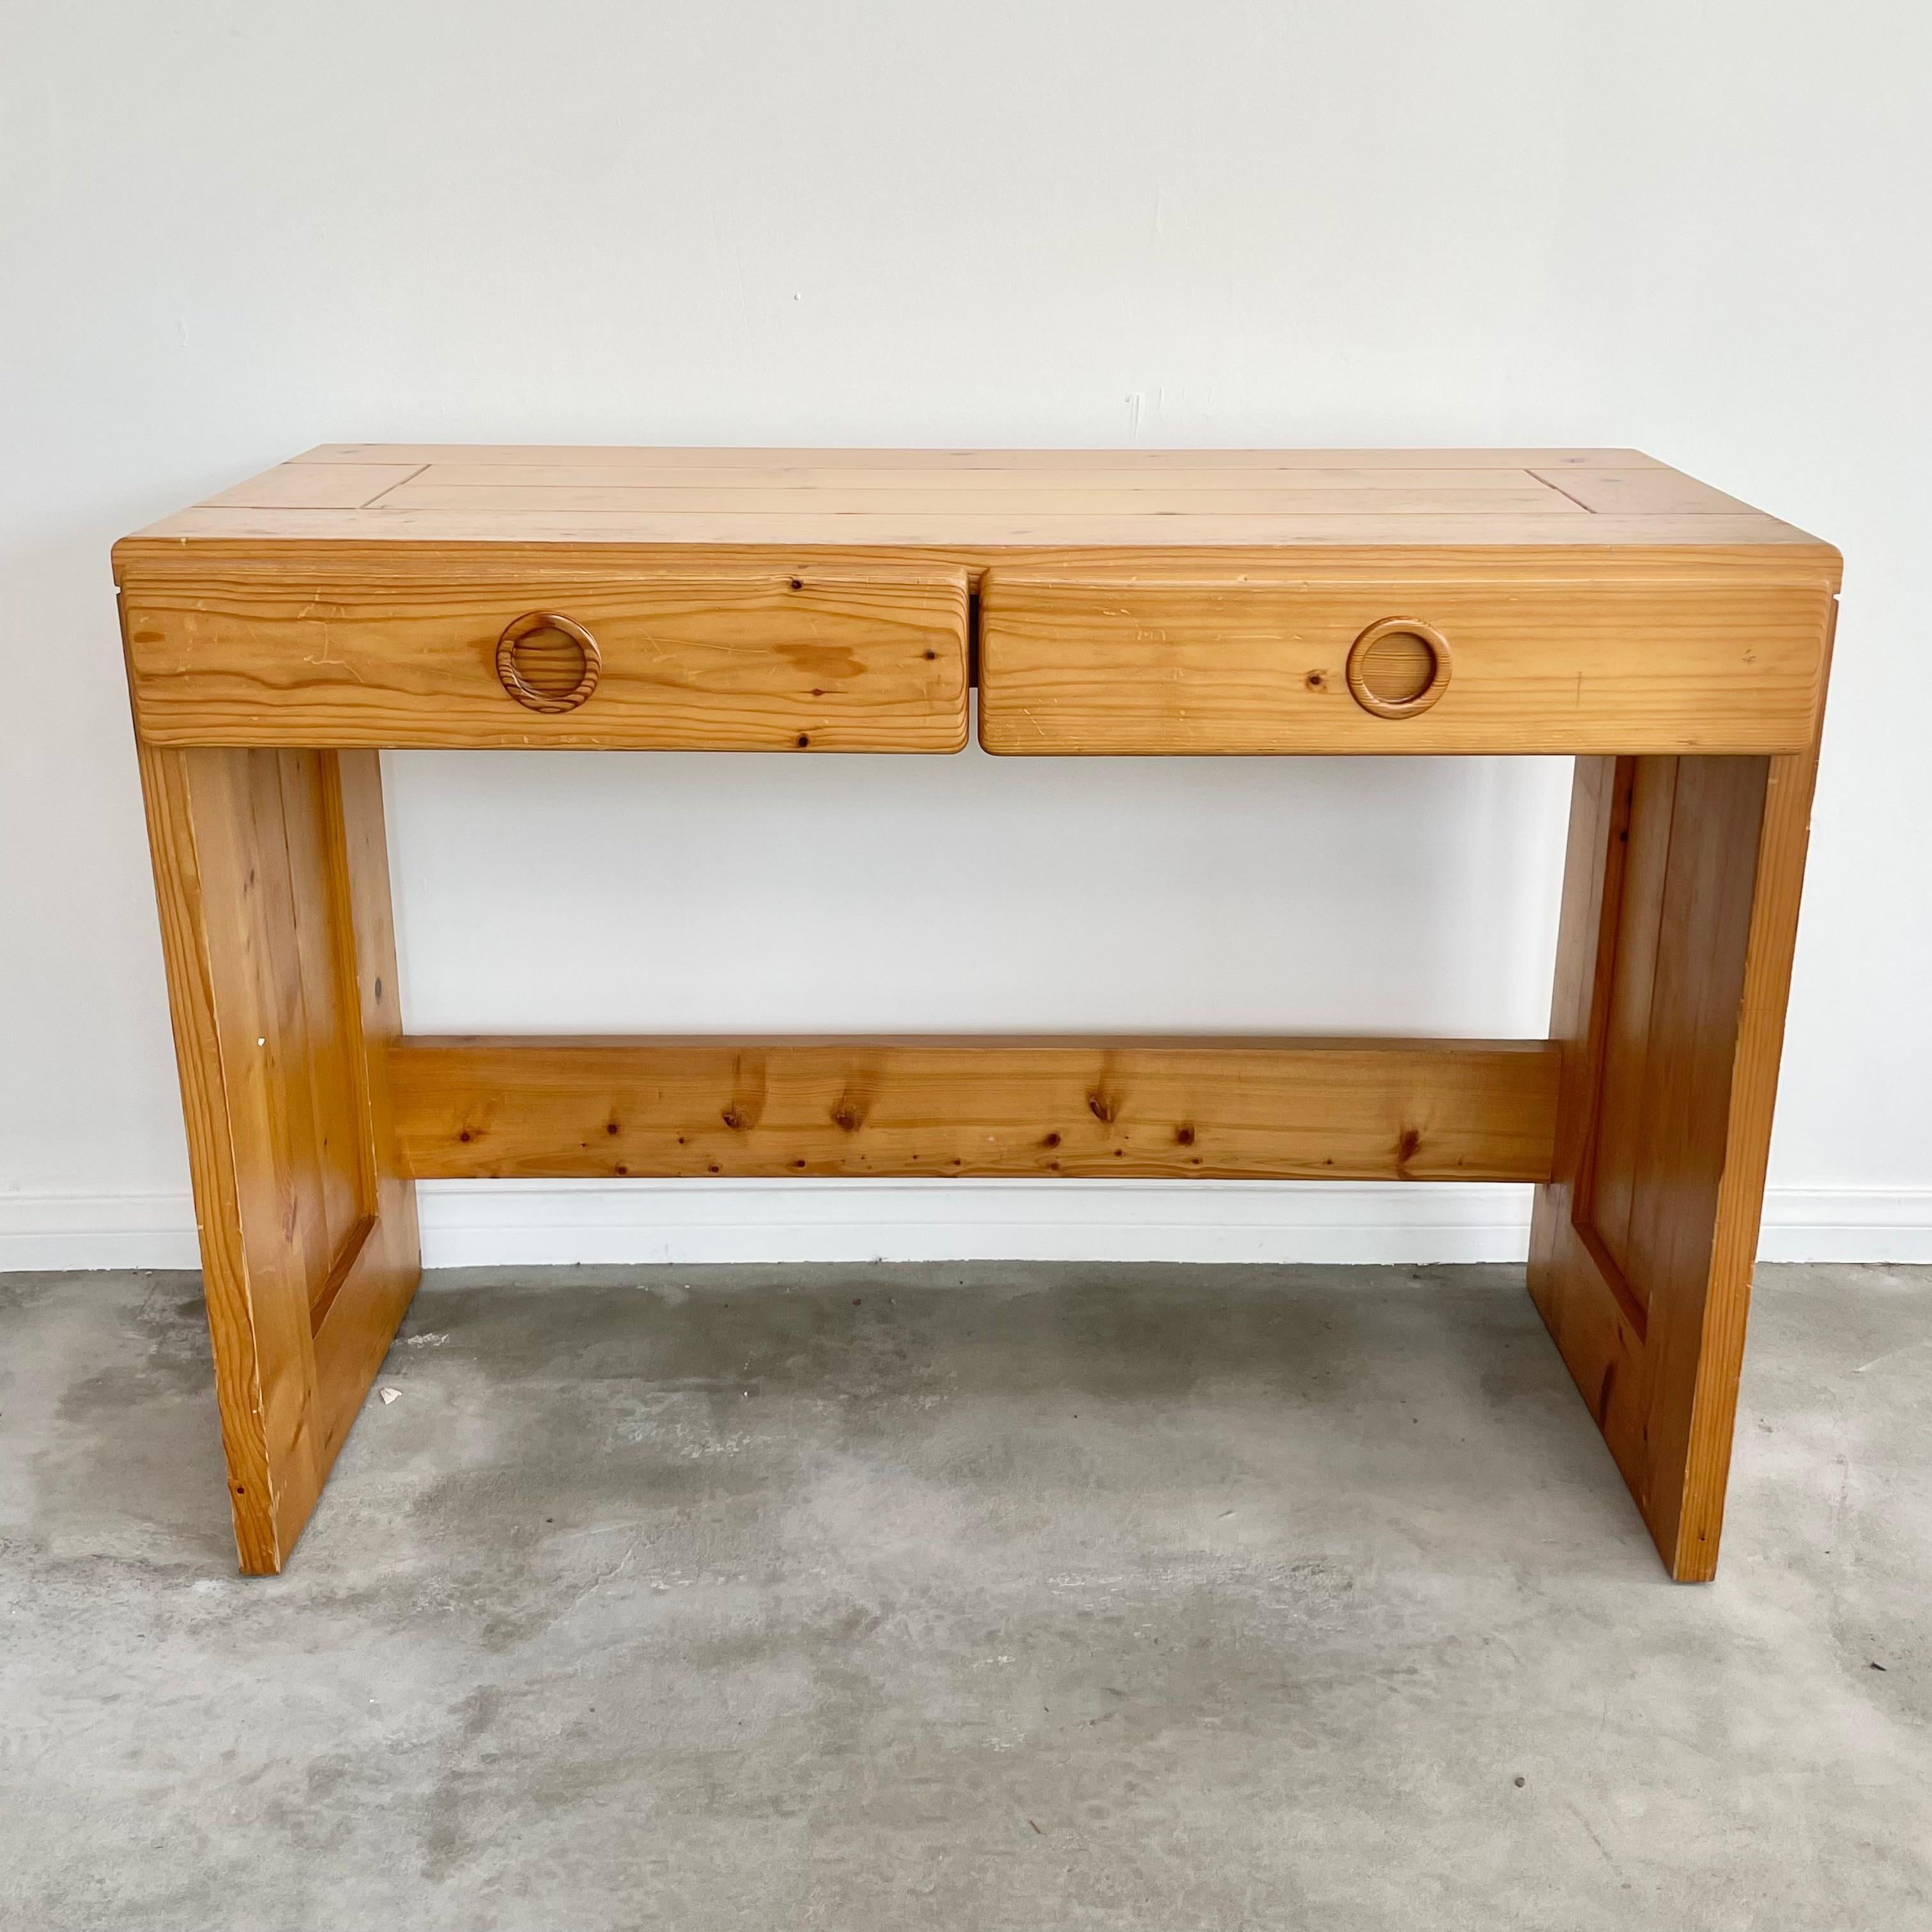 Pine Charlotte Perriand Desk for Les Arcs with Matching Stool For Sale